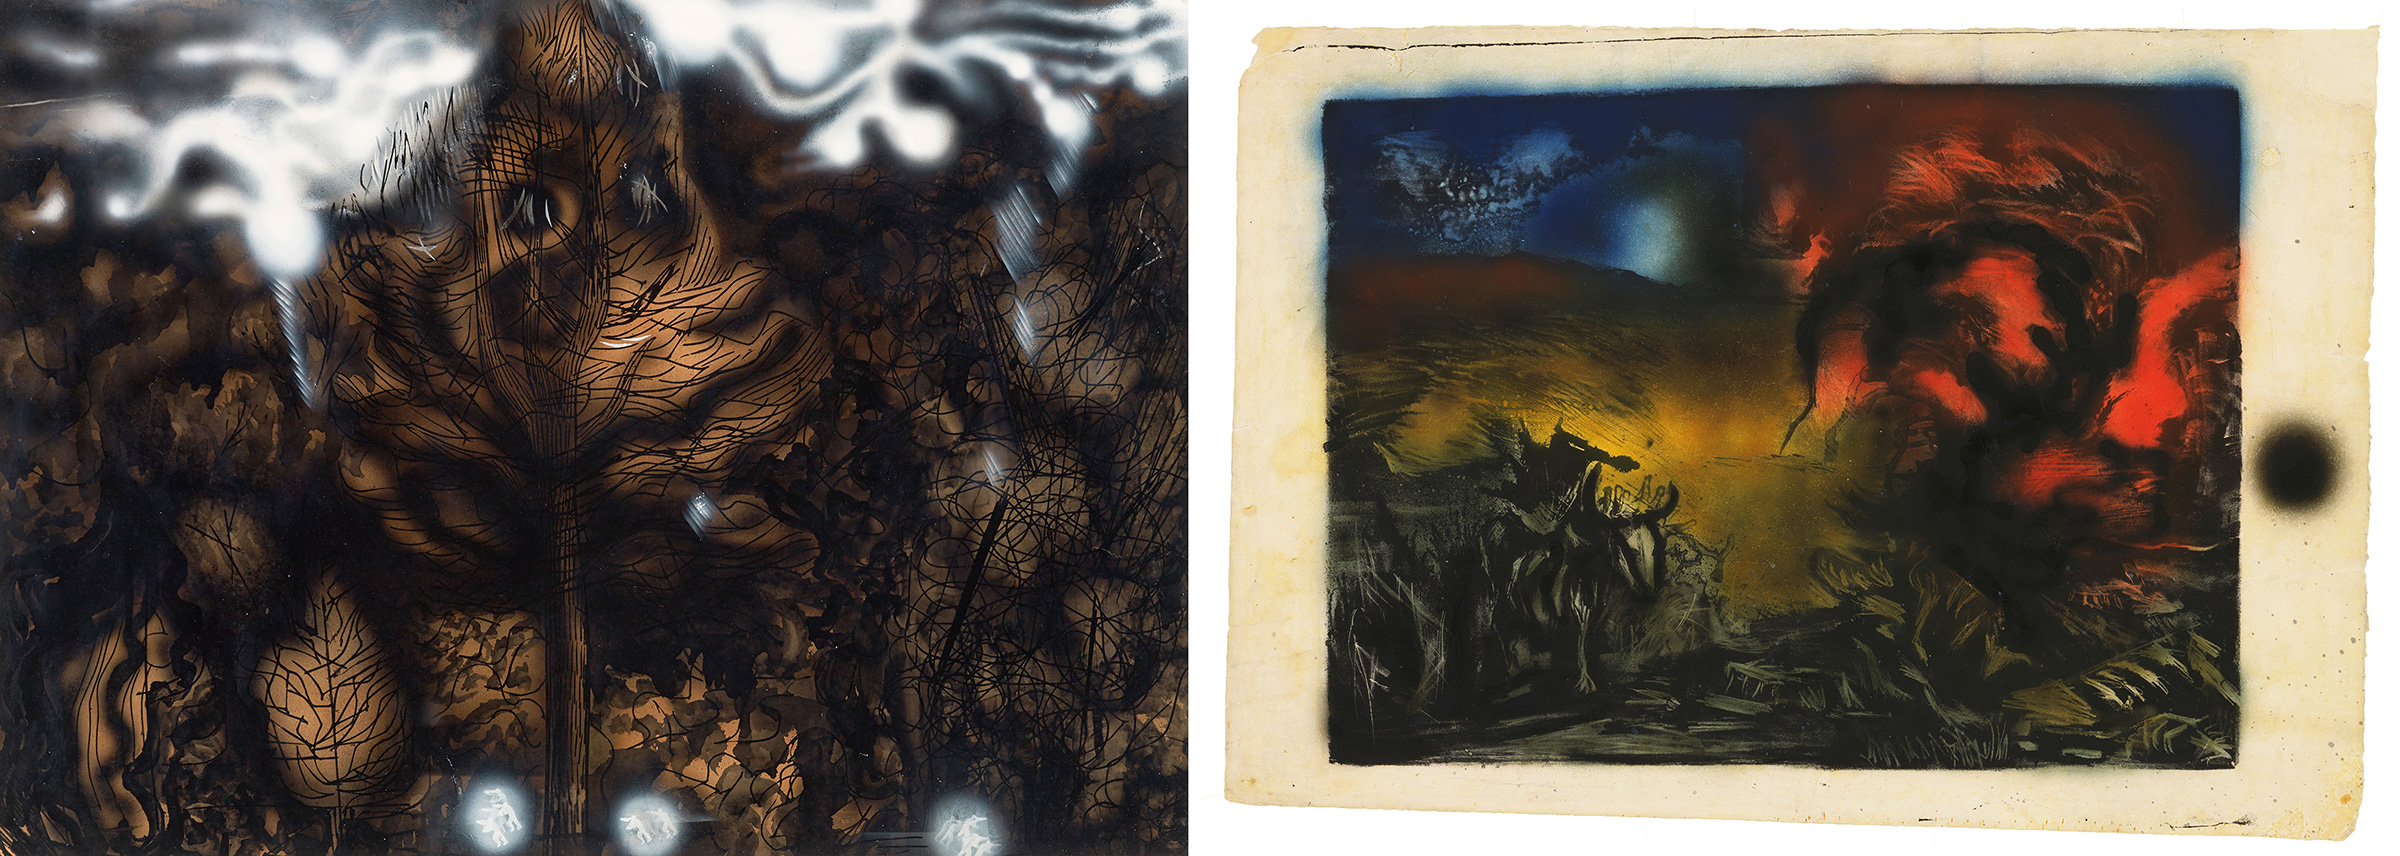 Left: David Alfaro Siqueiros, The Electric Forest, 1939; Right: Jackson Pollock, Landscape with Steer, 1936–37 (Indianapolis Museum of Art; The Pollock-Krasner Foundation/Artists Rights Society (ARS). Image: The Museum of Modern Art/SCALA/Art Resource)